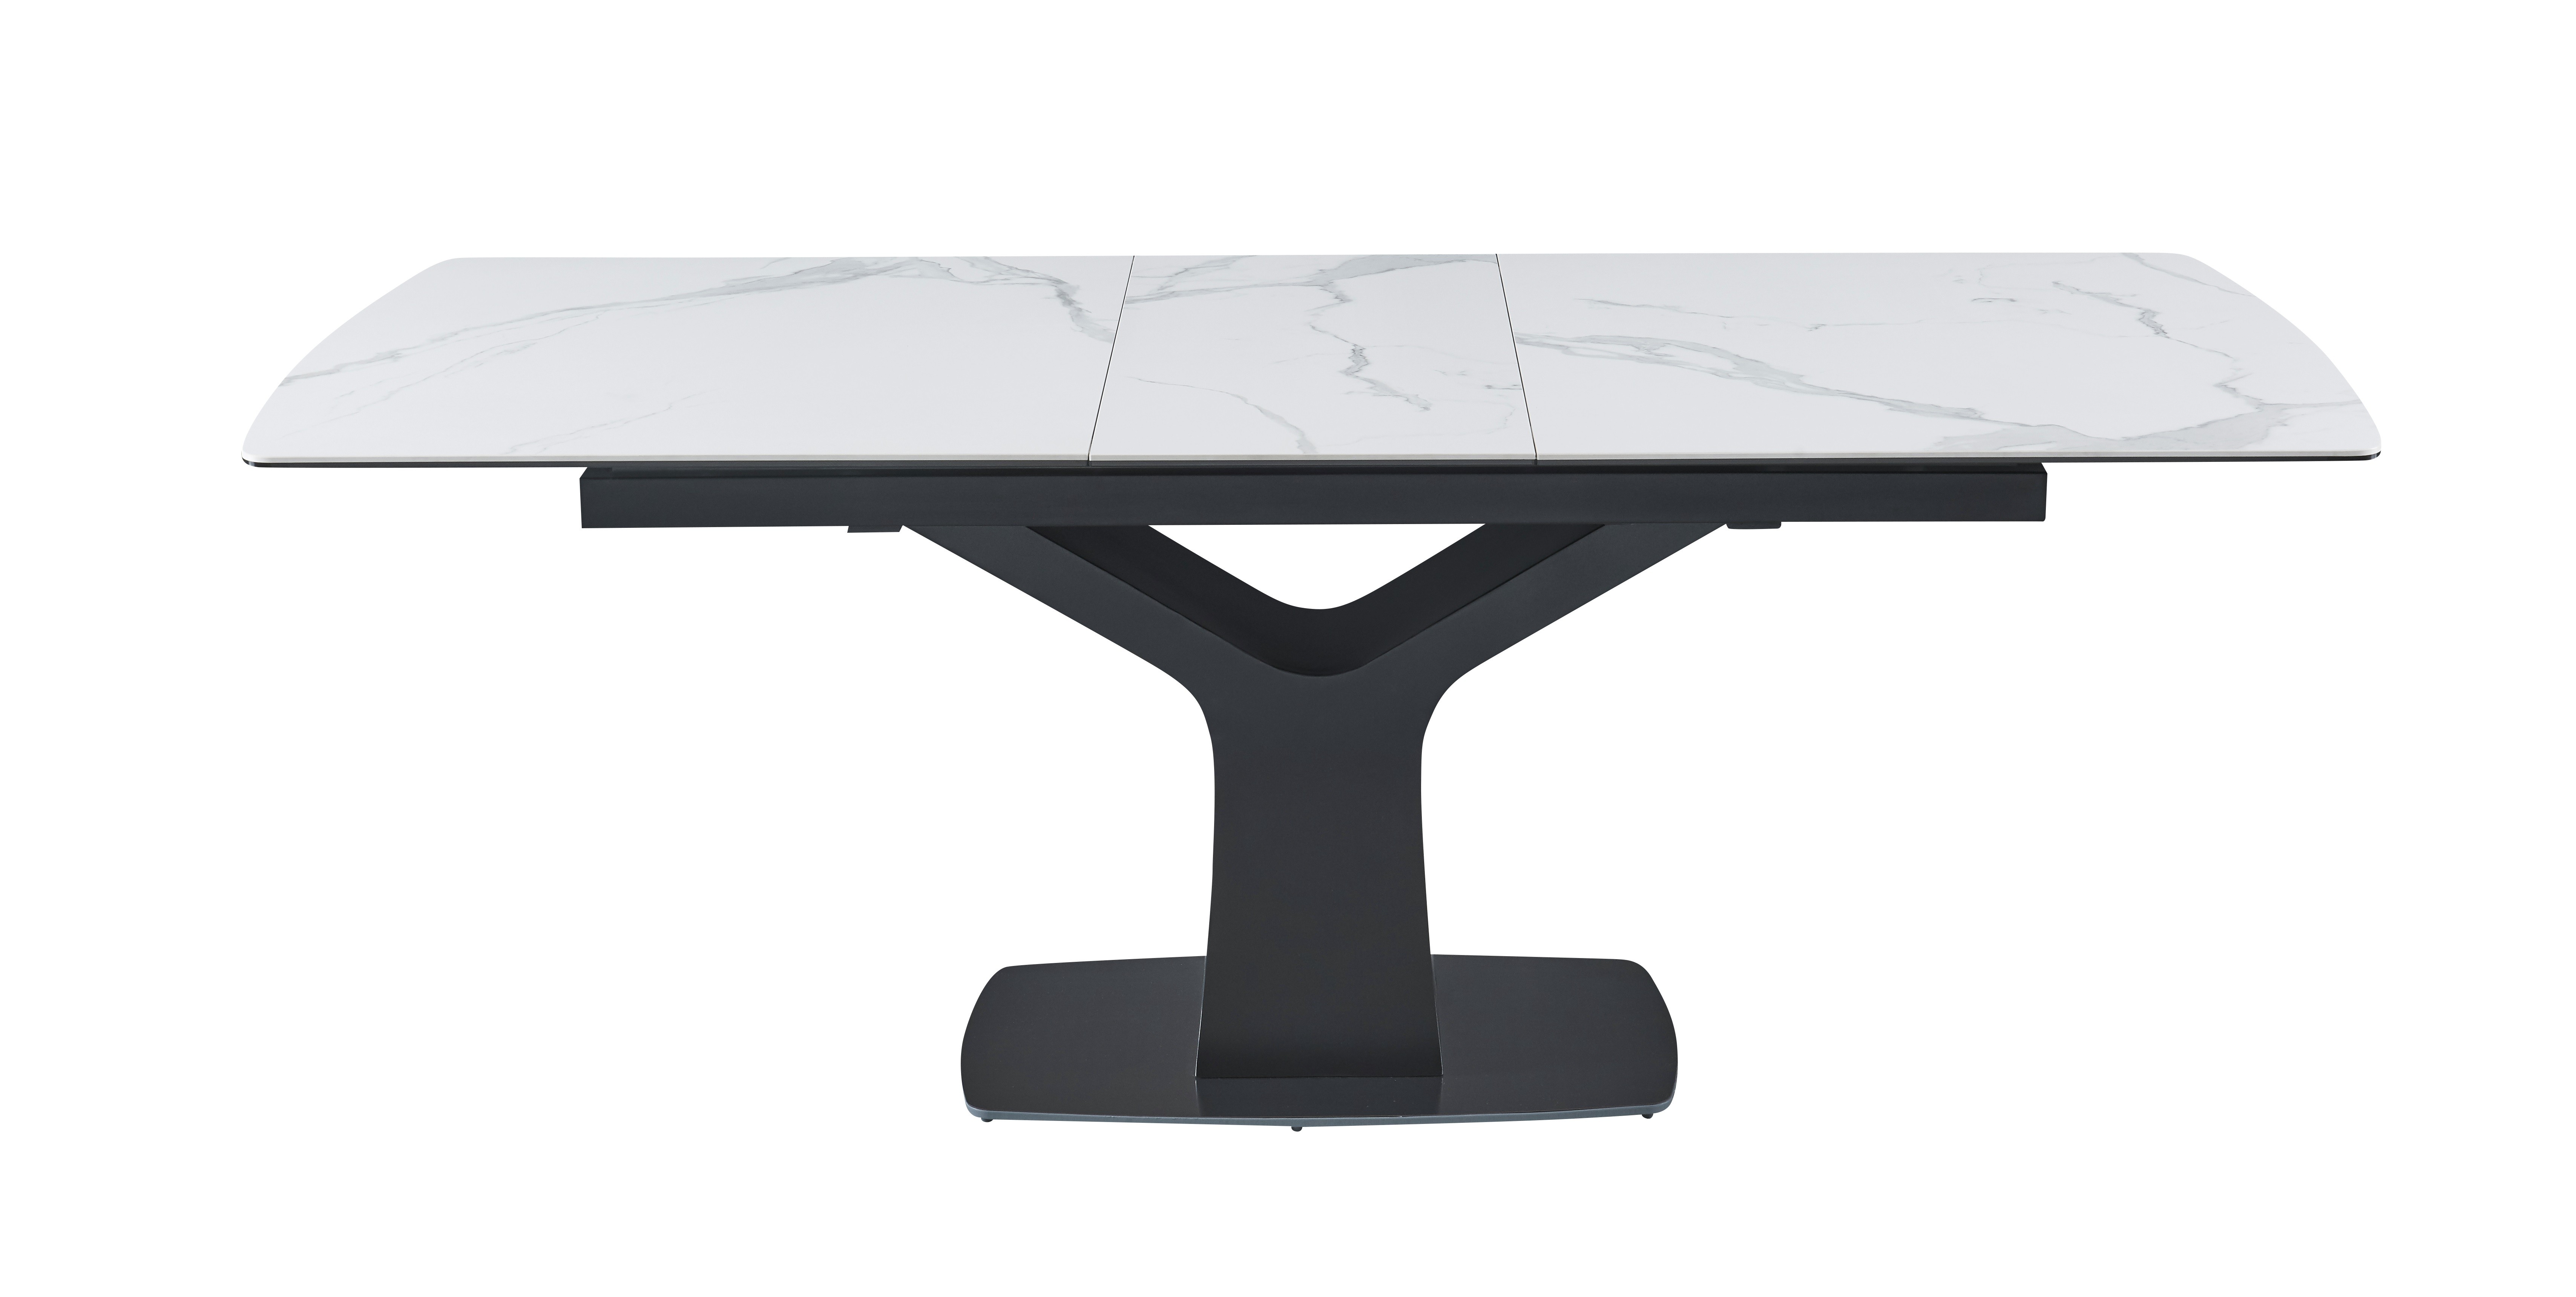 Beautiful Grey Brush Top and Stainless Steel Legs Dining Table